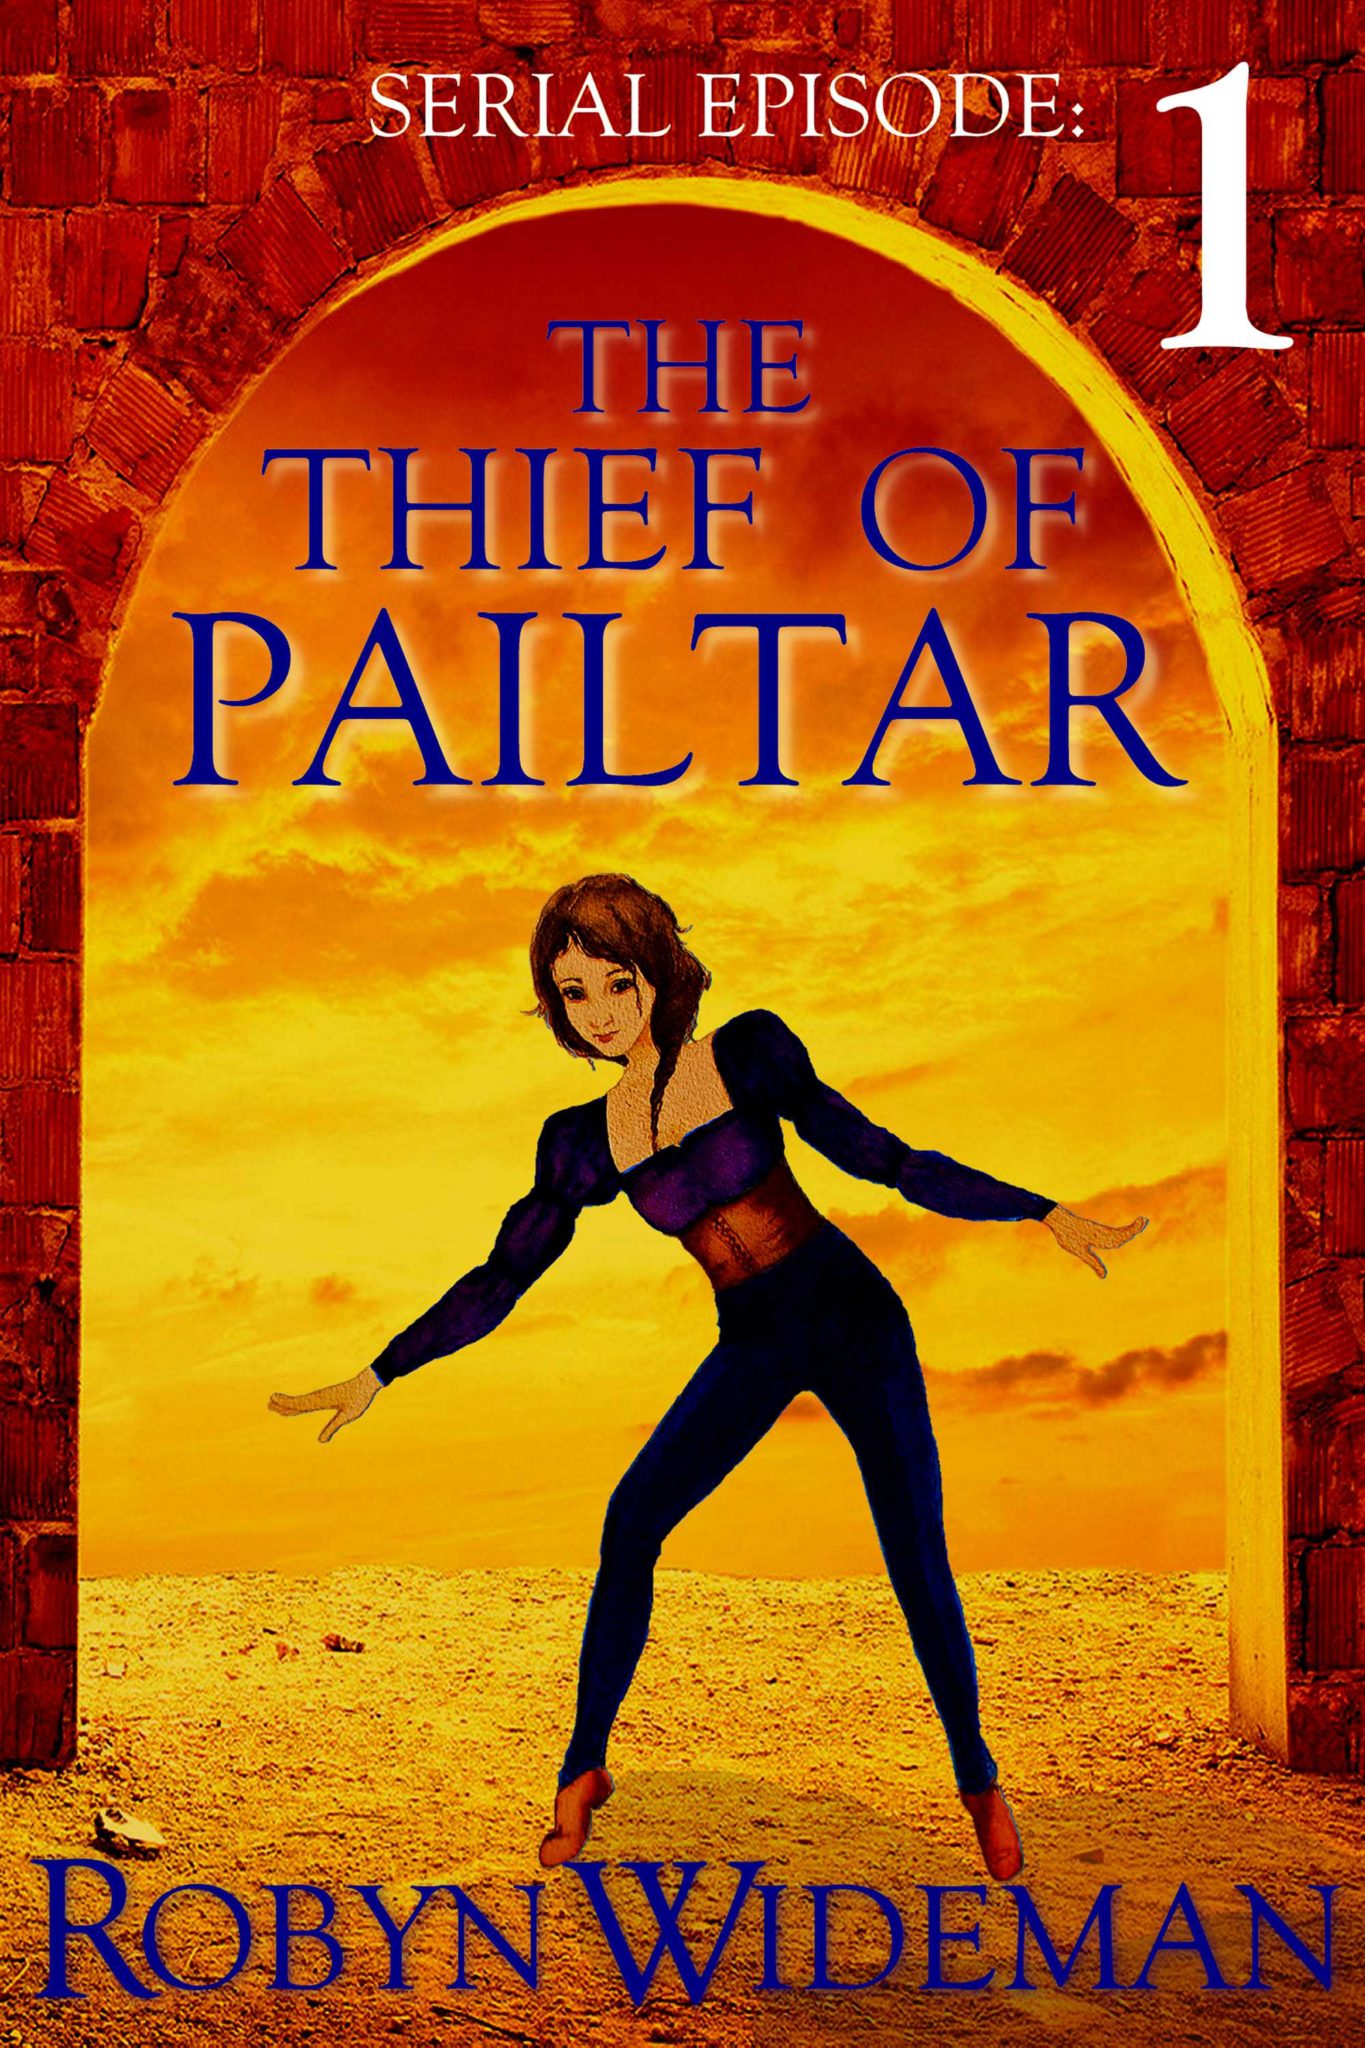 FREE: Thief of Pailtar: Episode 1 by Robyn Wideman